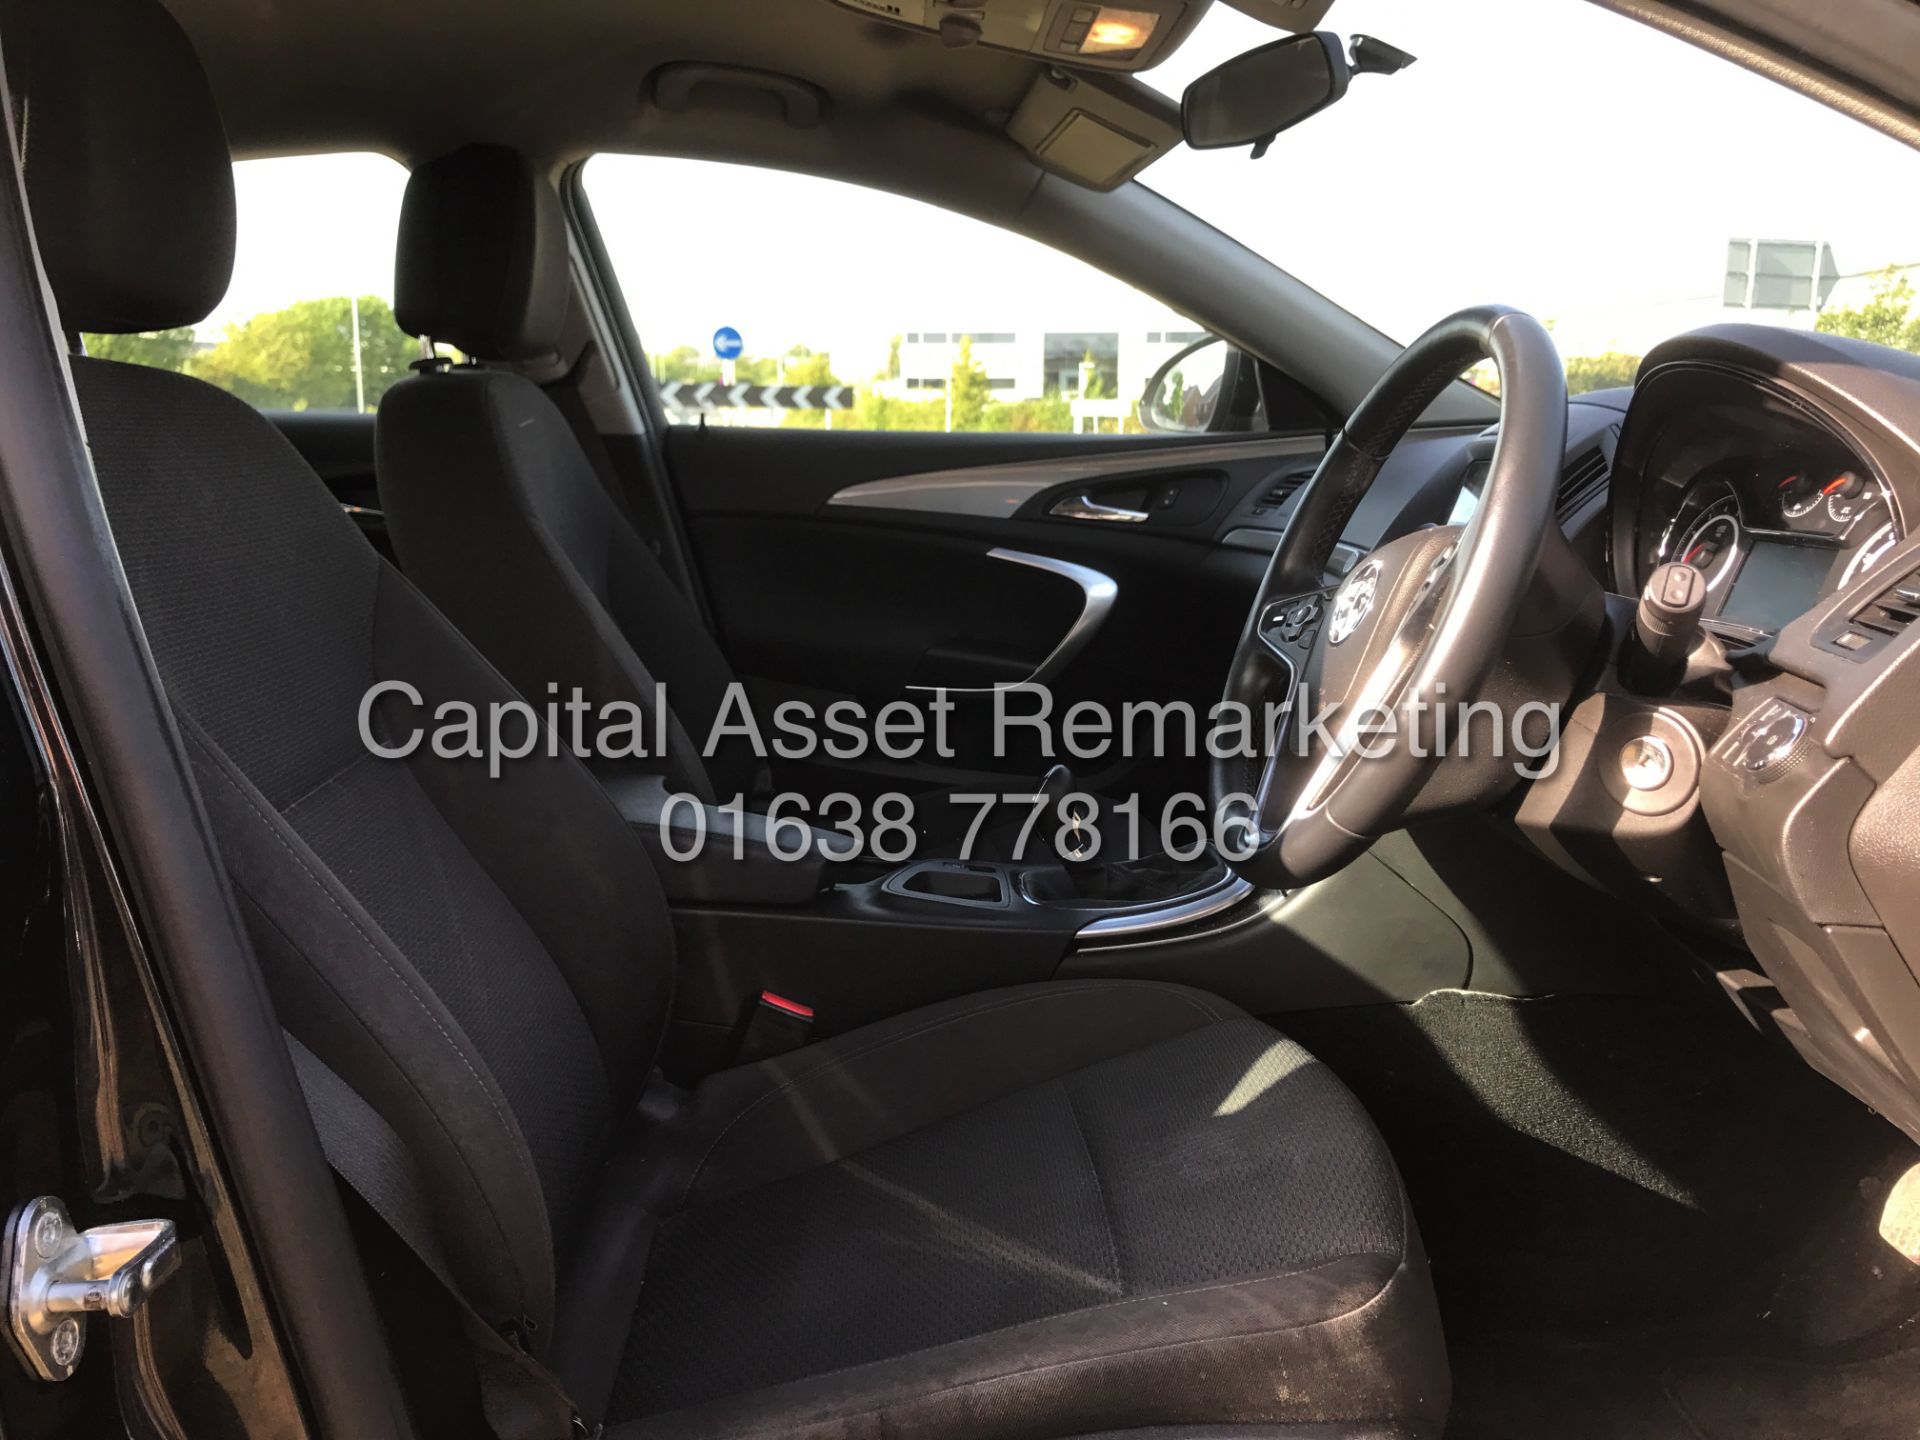 On Sale VAUXHALL INSIGNIA 2.0CDTI "DESIGN" 6 SPEED (2014 MODEL-NEW SHAPE) AIR CON -ELEC PACK -CRUISE - Image 10 of 22